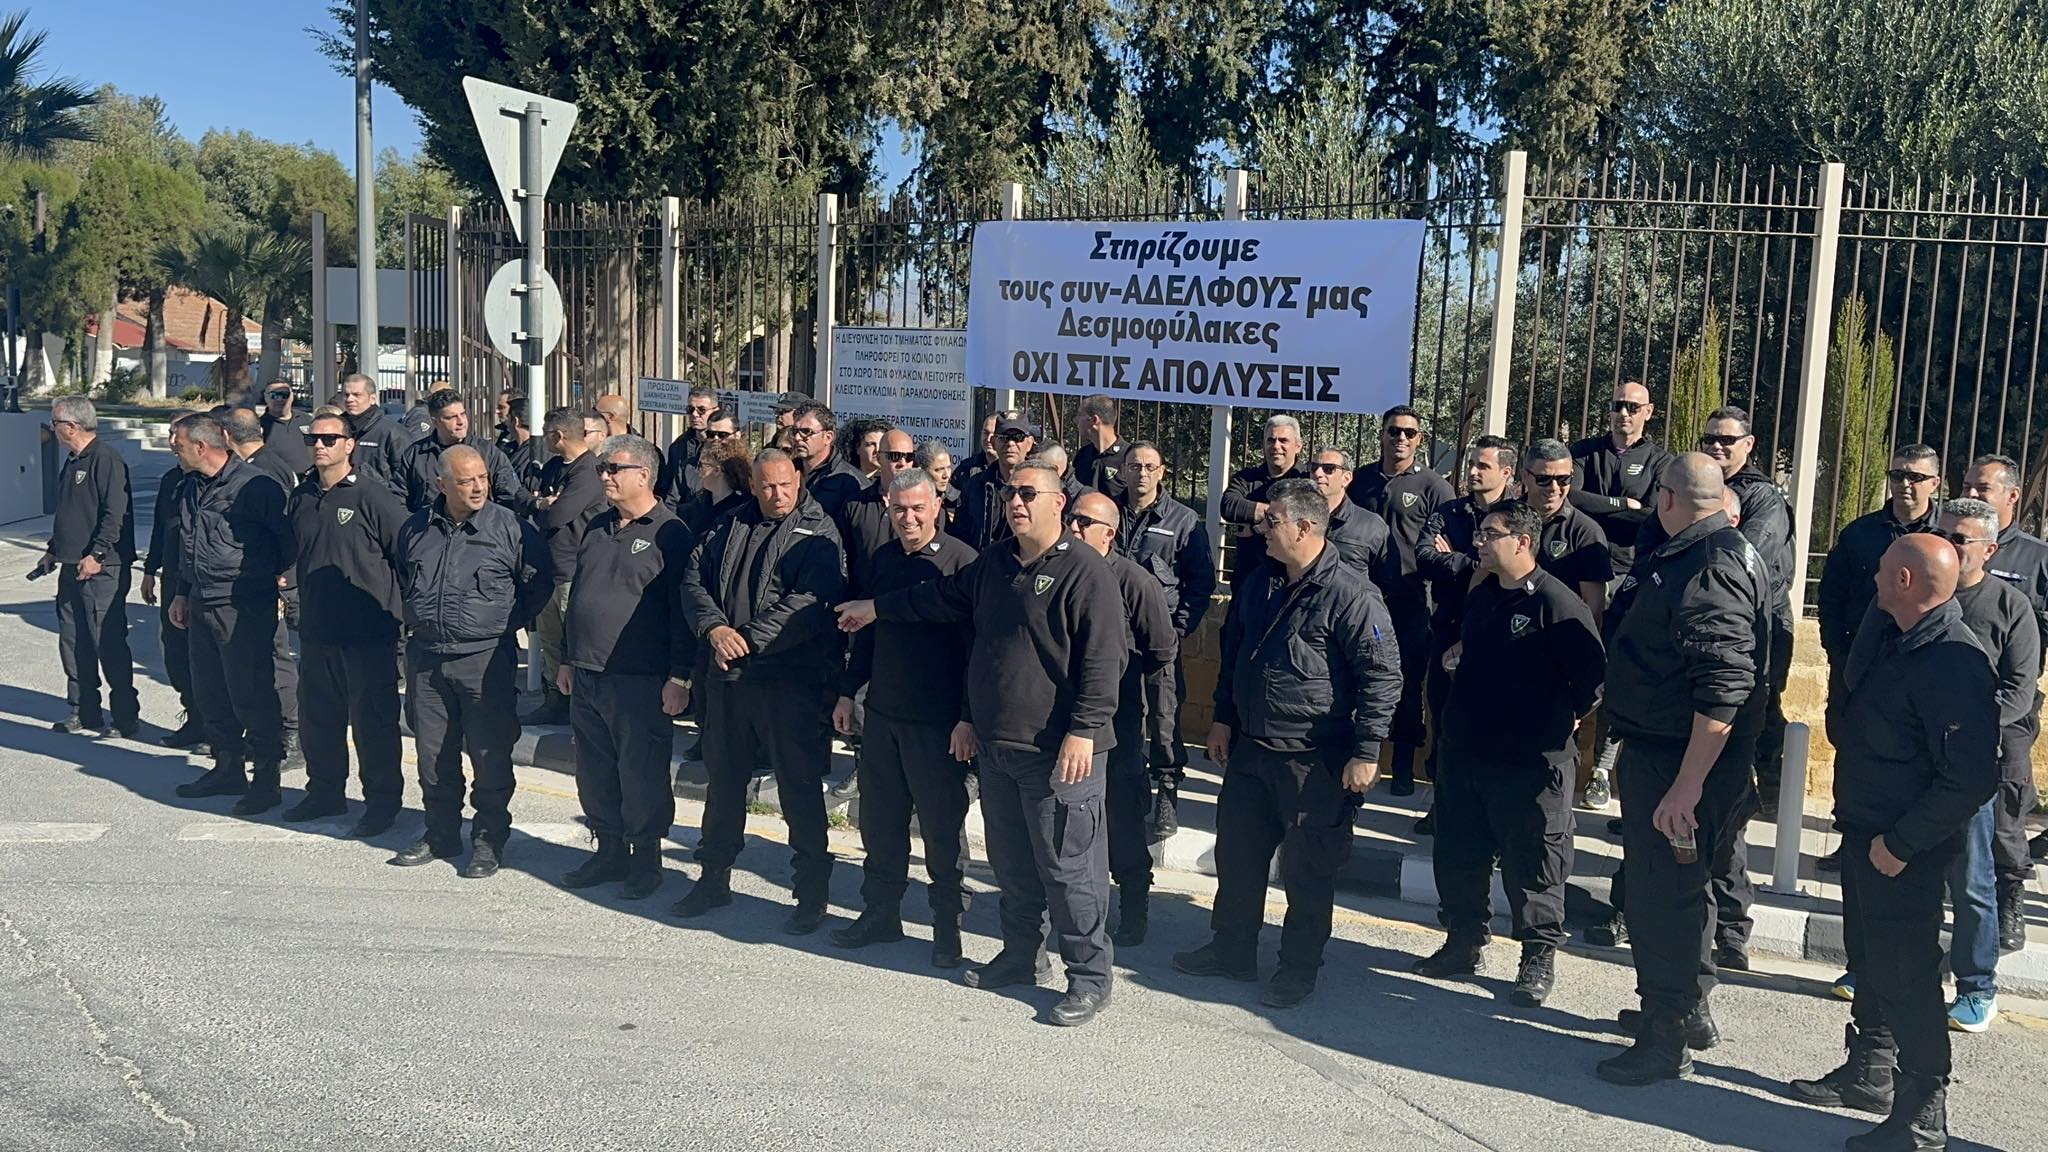 Protest at prison over ‘dismissal’ of 13 workers